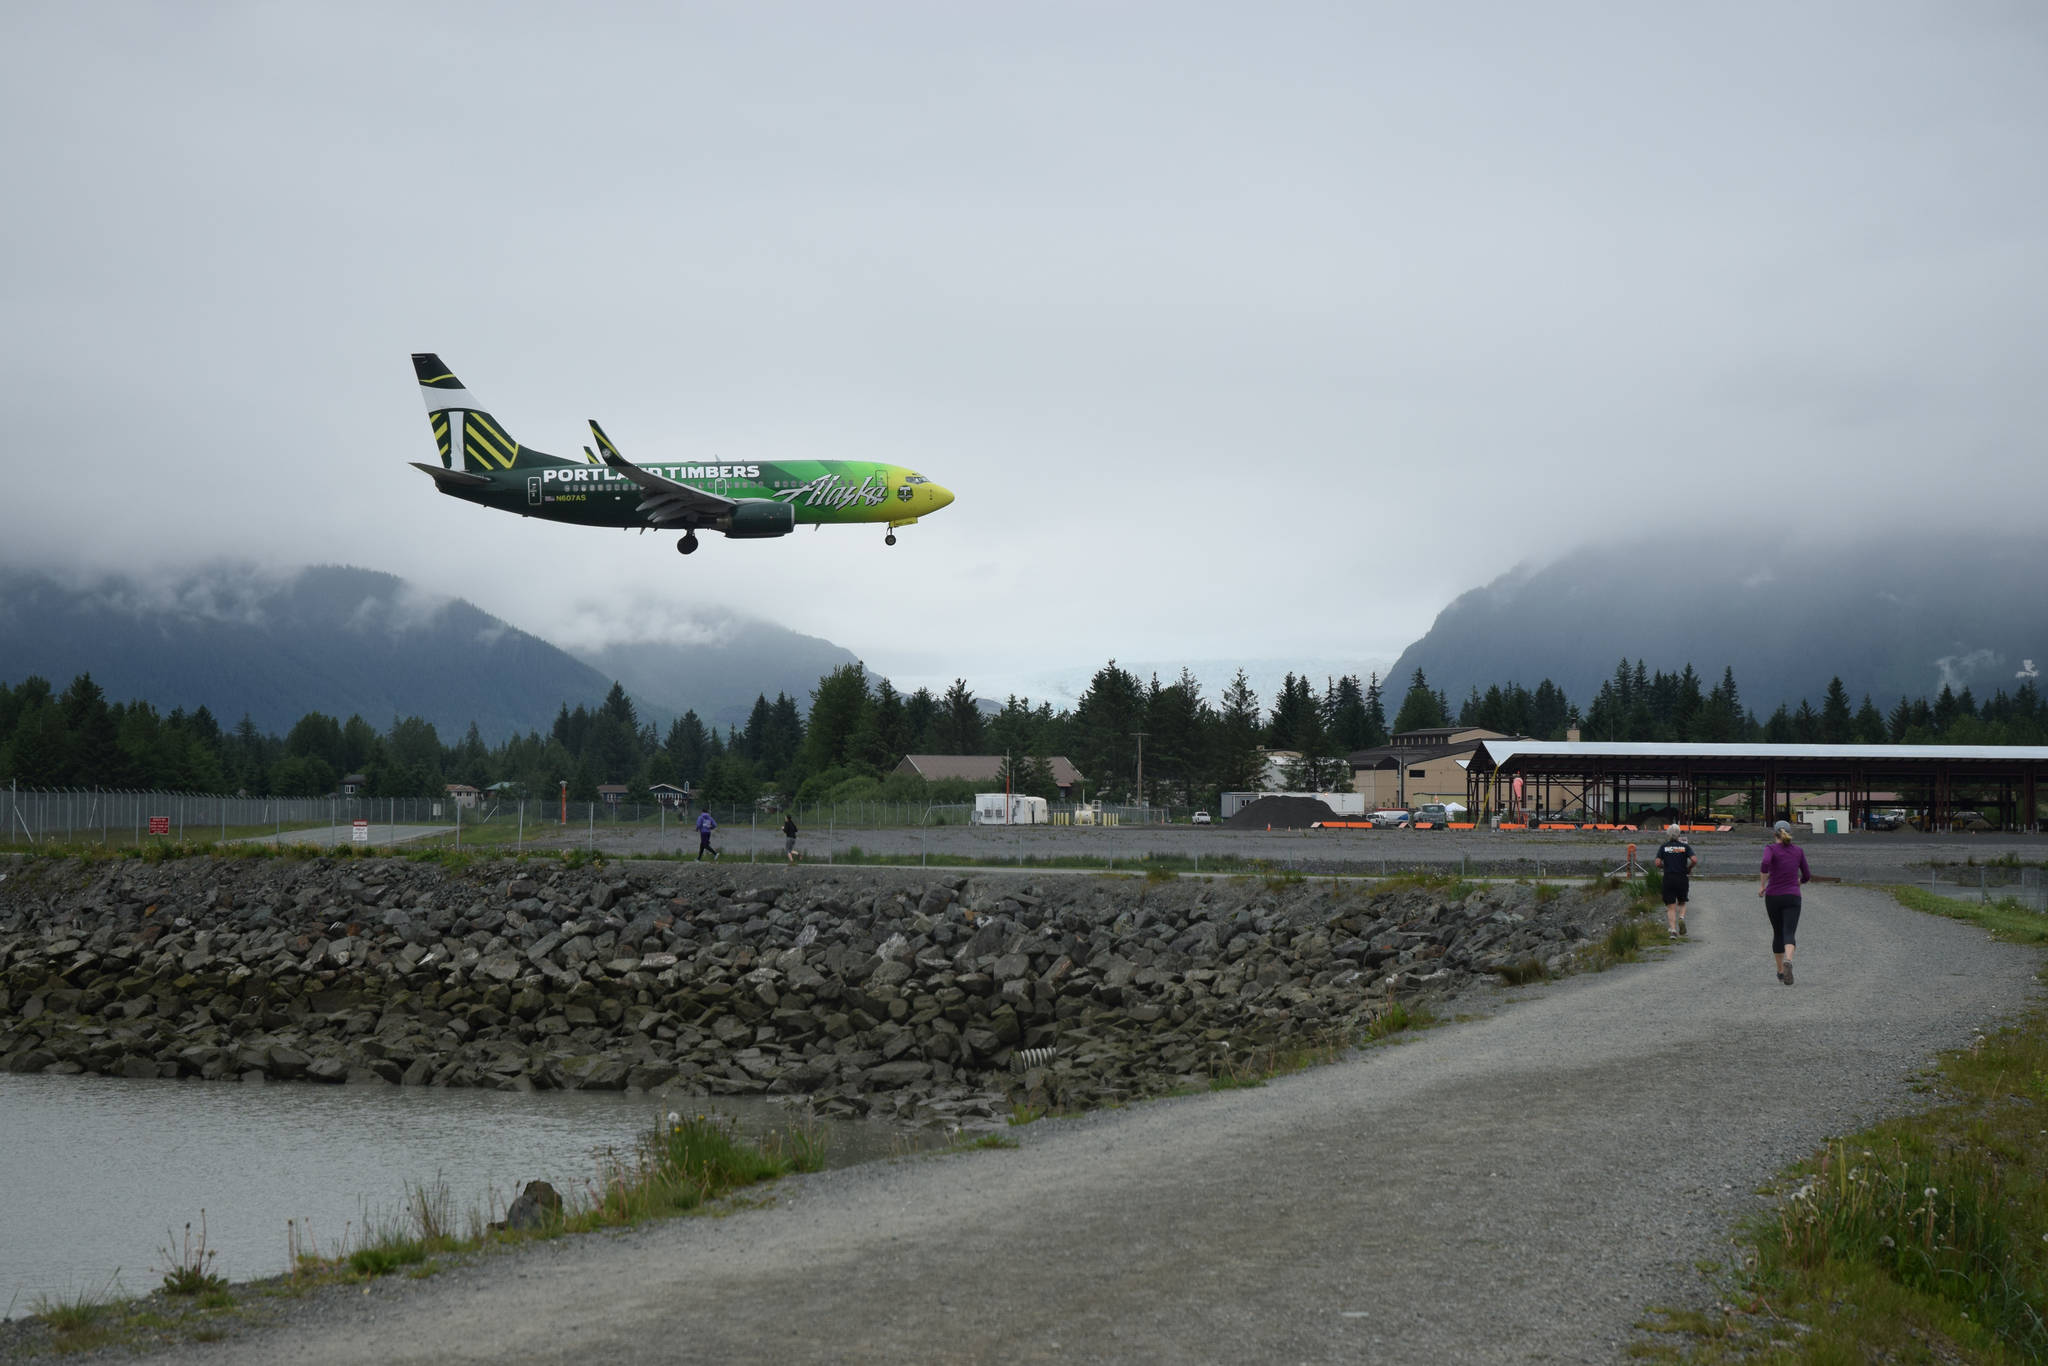 An Alaska Airlines jet prepares to land at the Juneau International Airport as runners compete in the Wild for Conservation 5K, Saturday, June 10. The race raised money for the Southeast Alaska Land Trust, a non-profit conservation group based in Juneau. (Nolin Ainsworth | Juneau Empire)